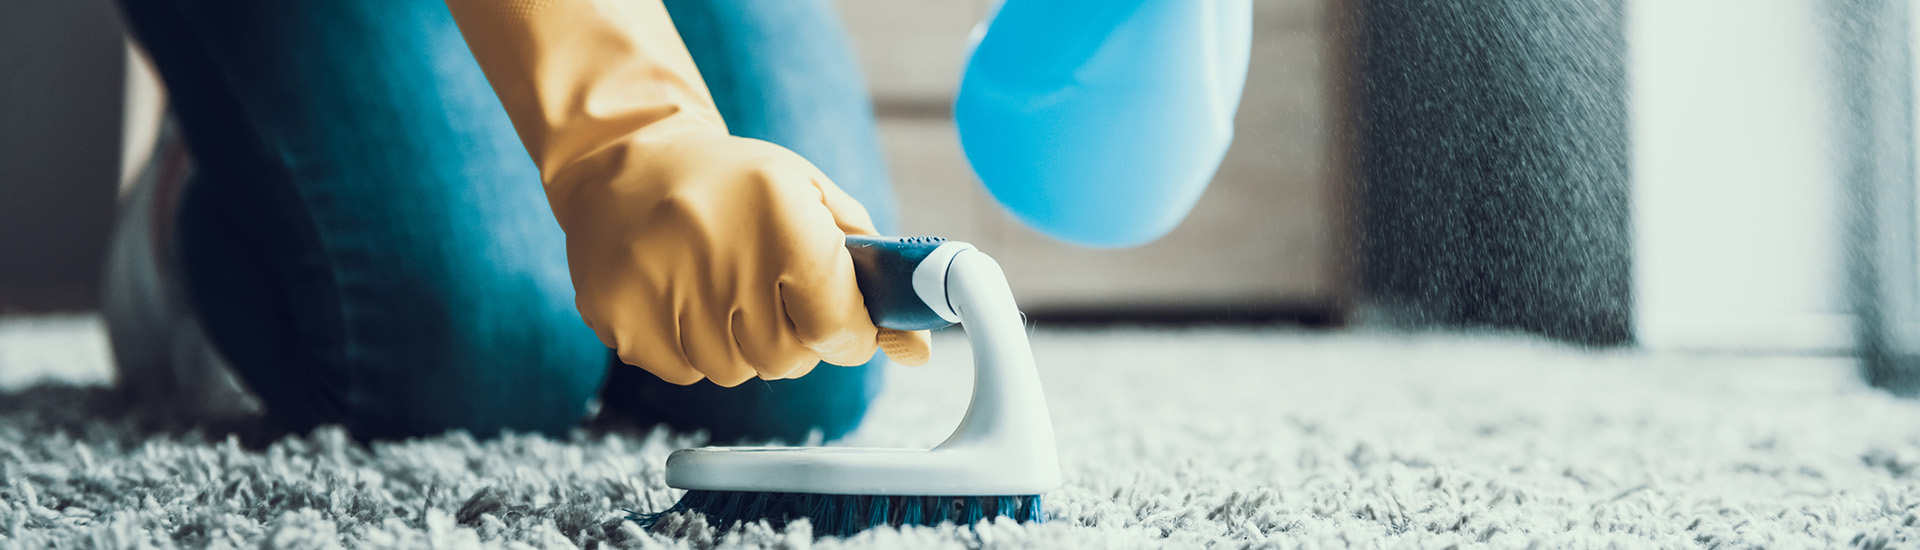 does professional carpet cleaning really work?